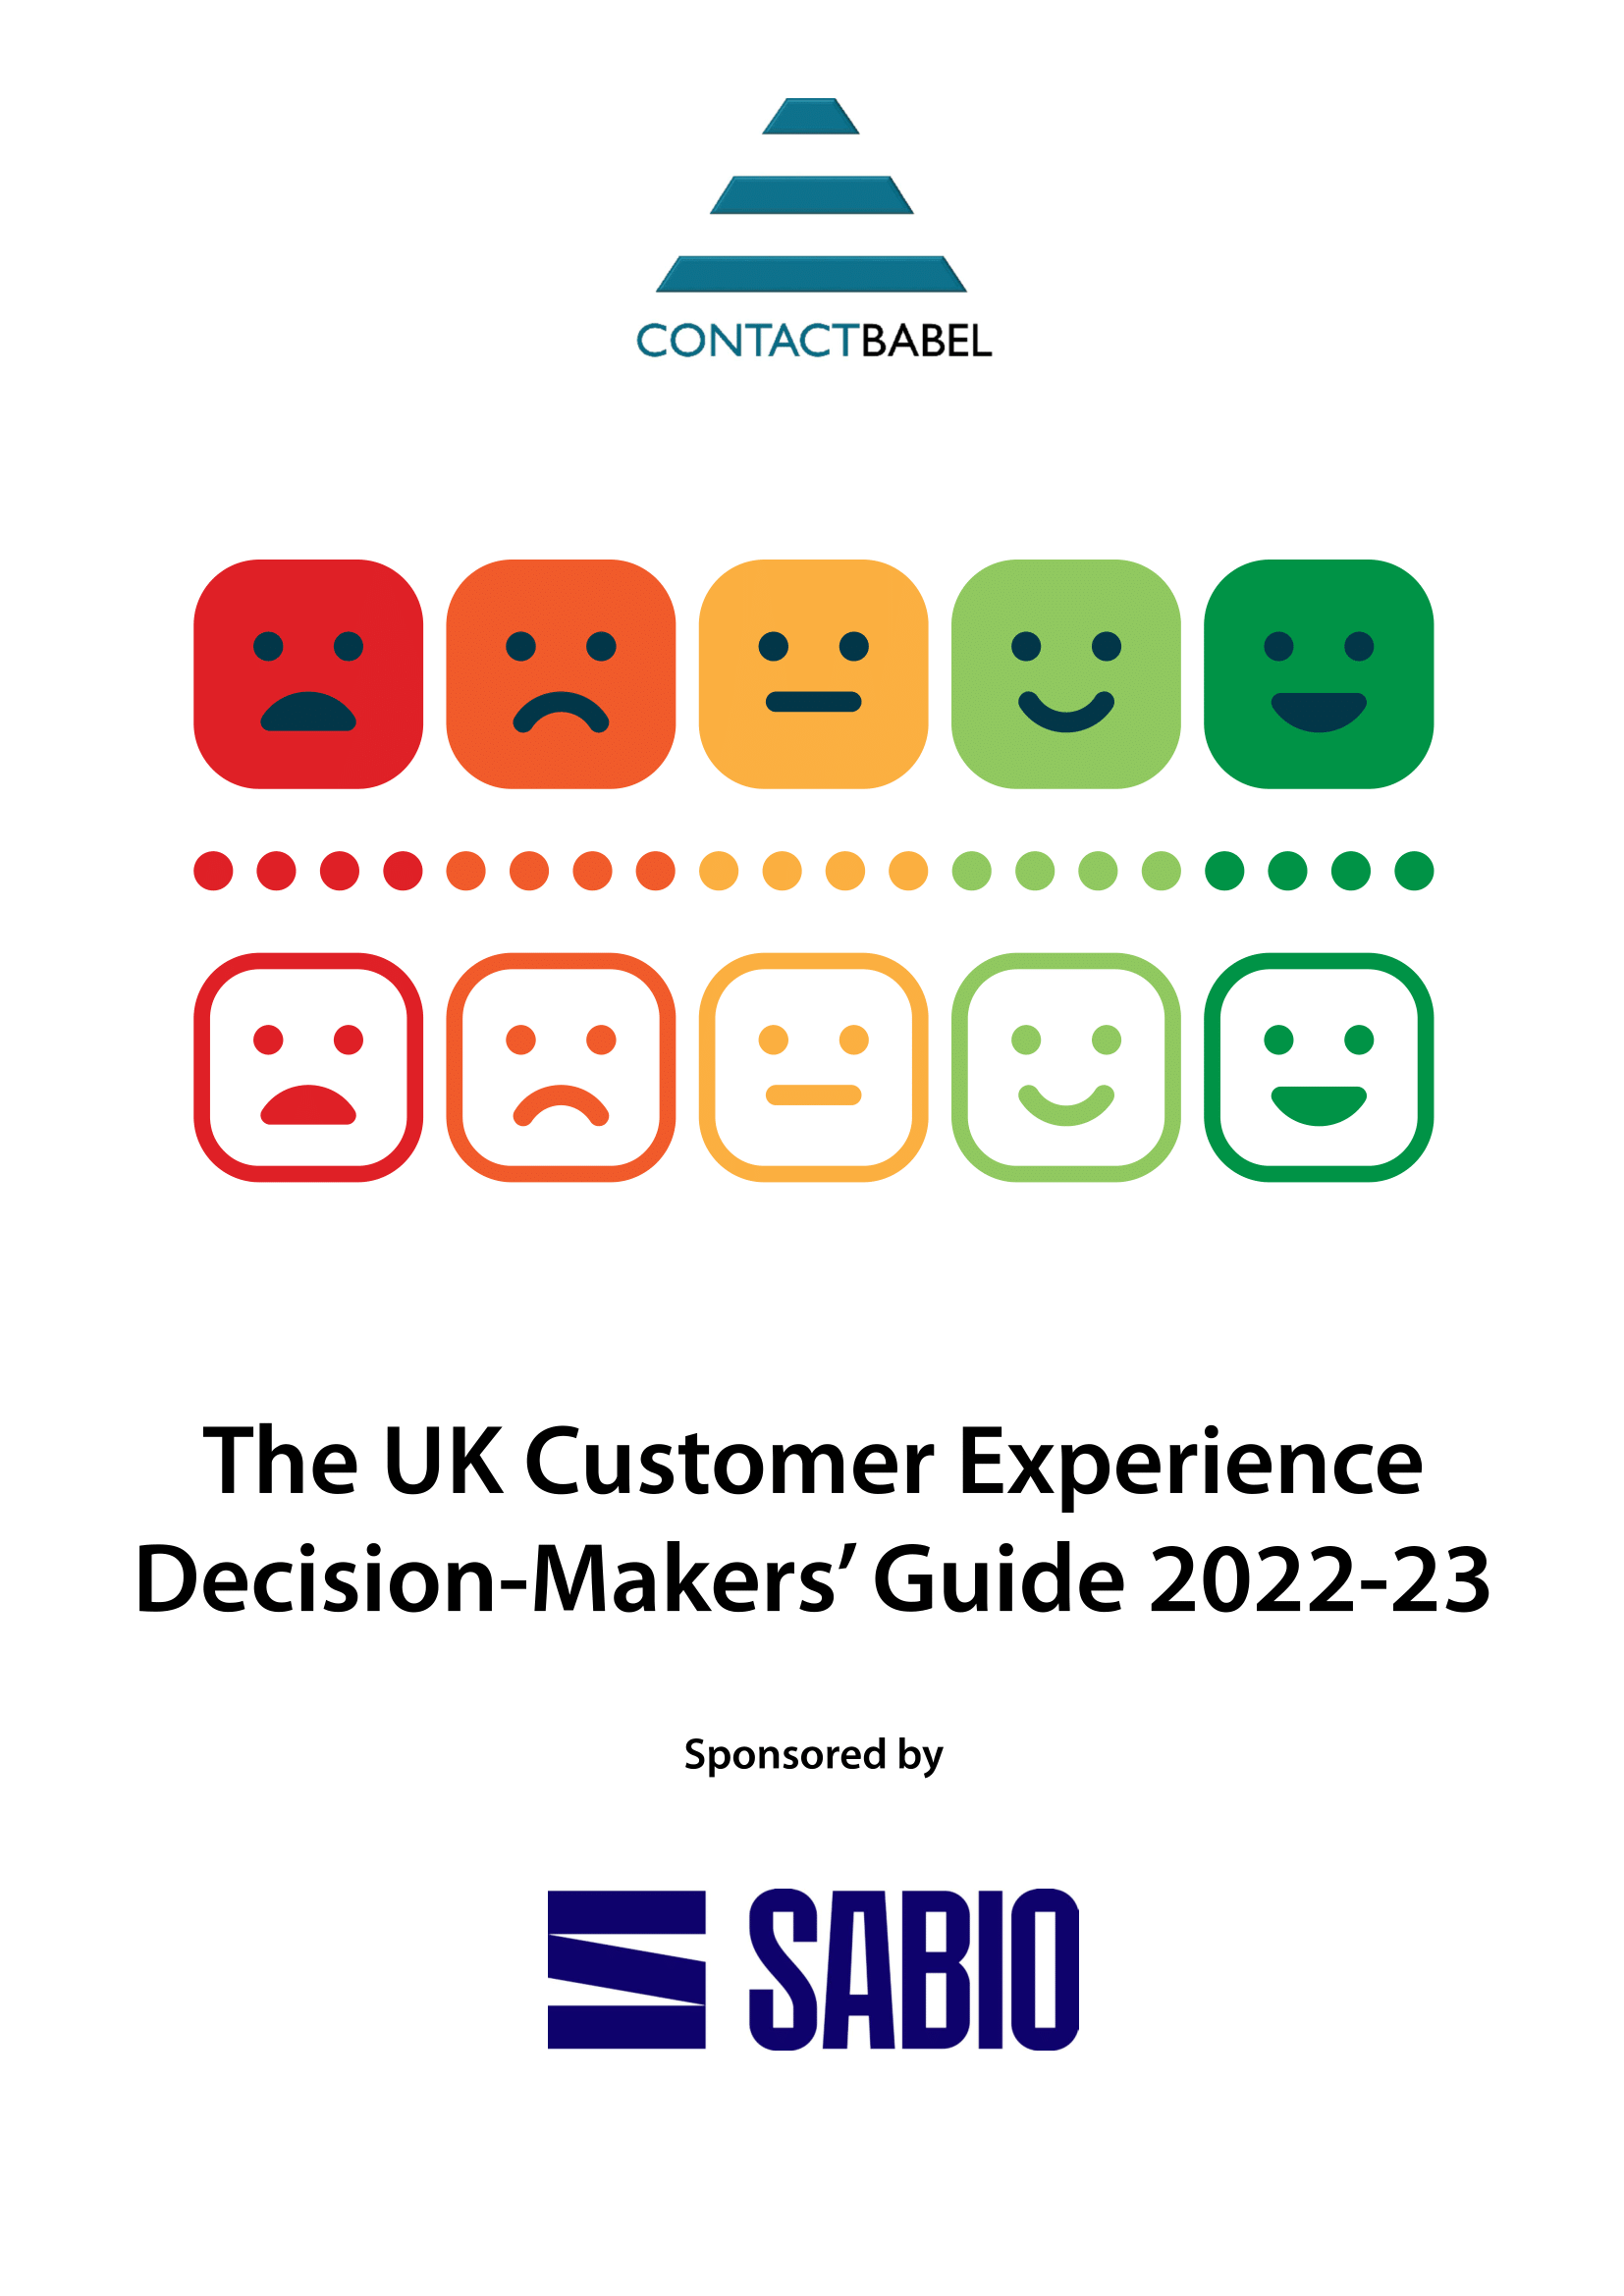 The UK Customer Experience Decision-Makers’ Guide 2022-23